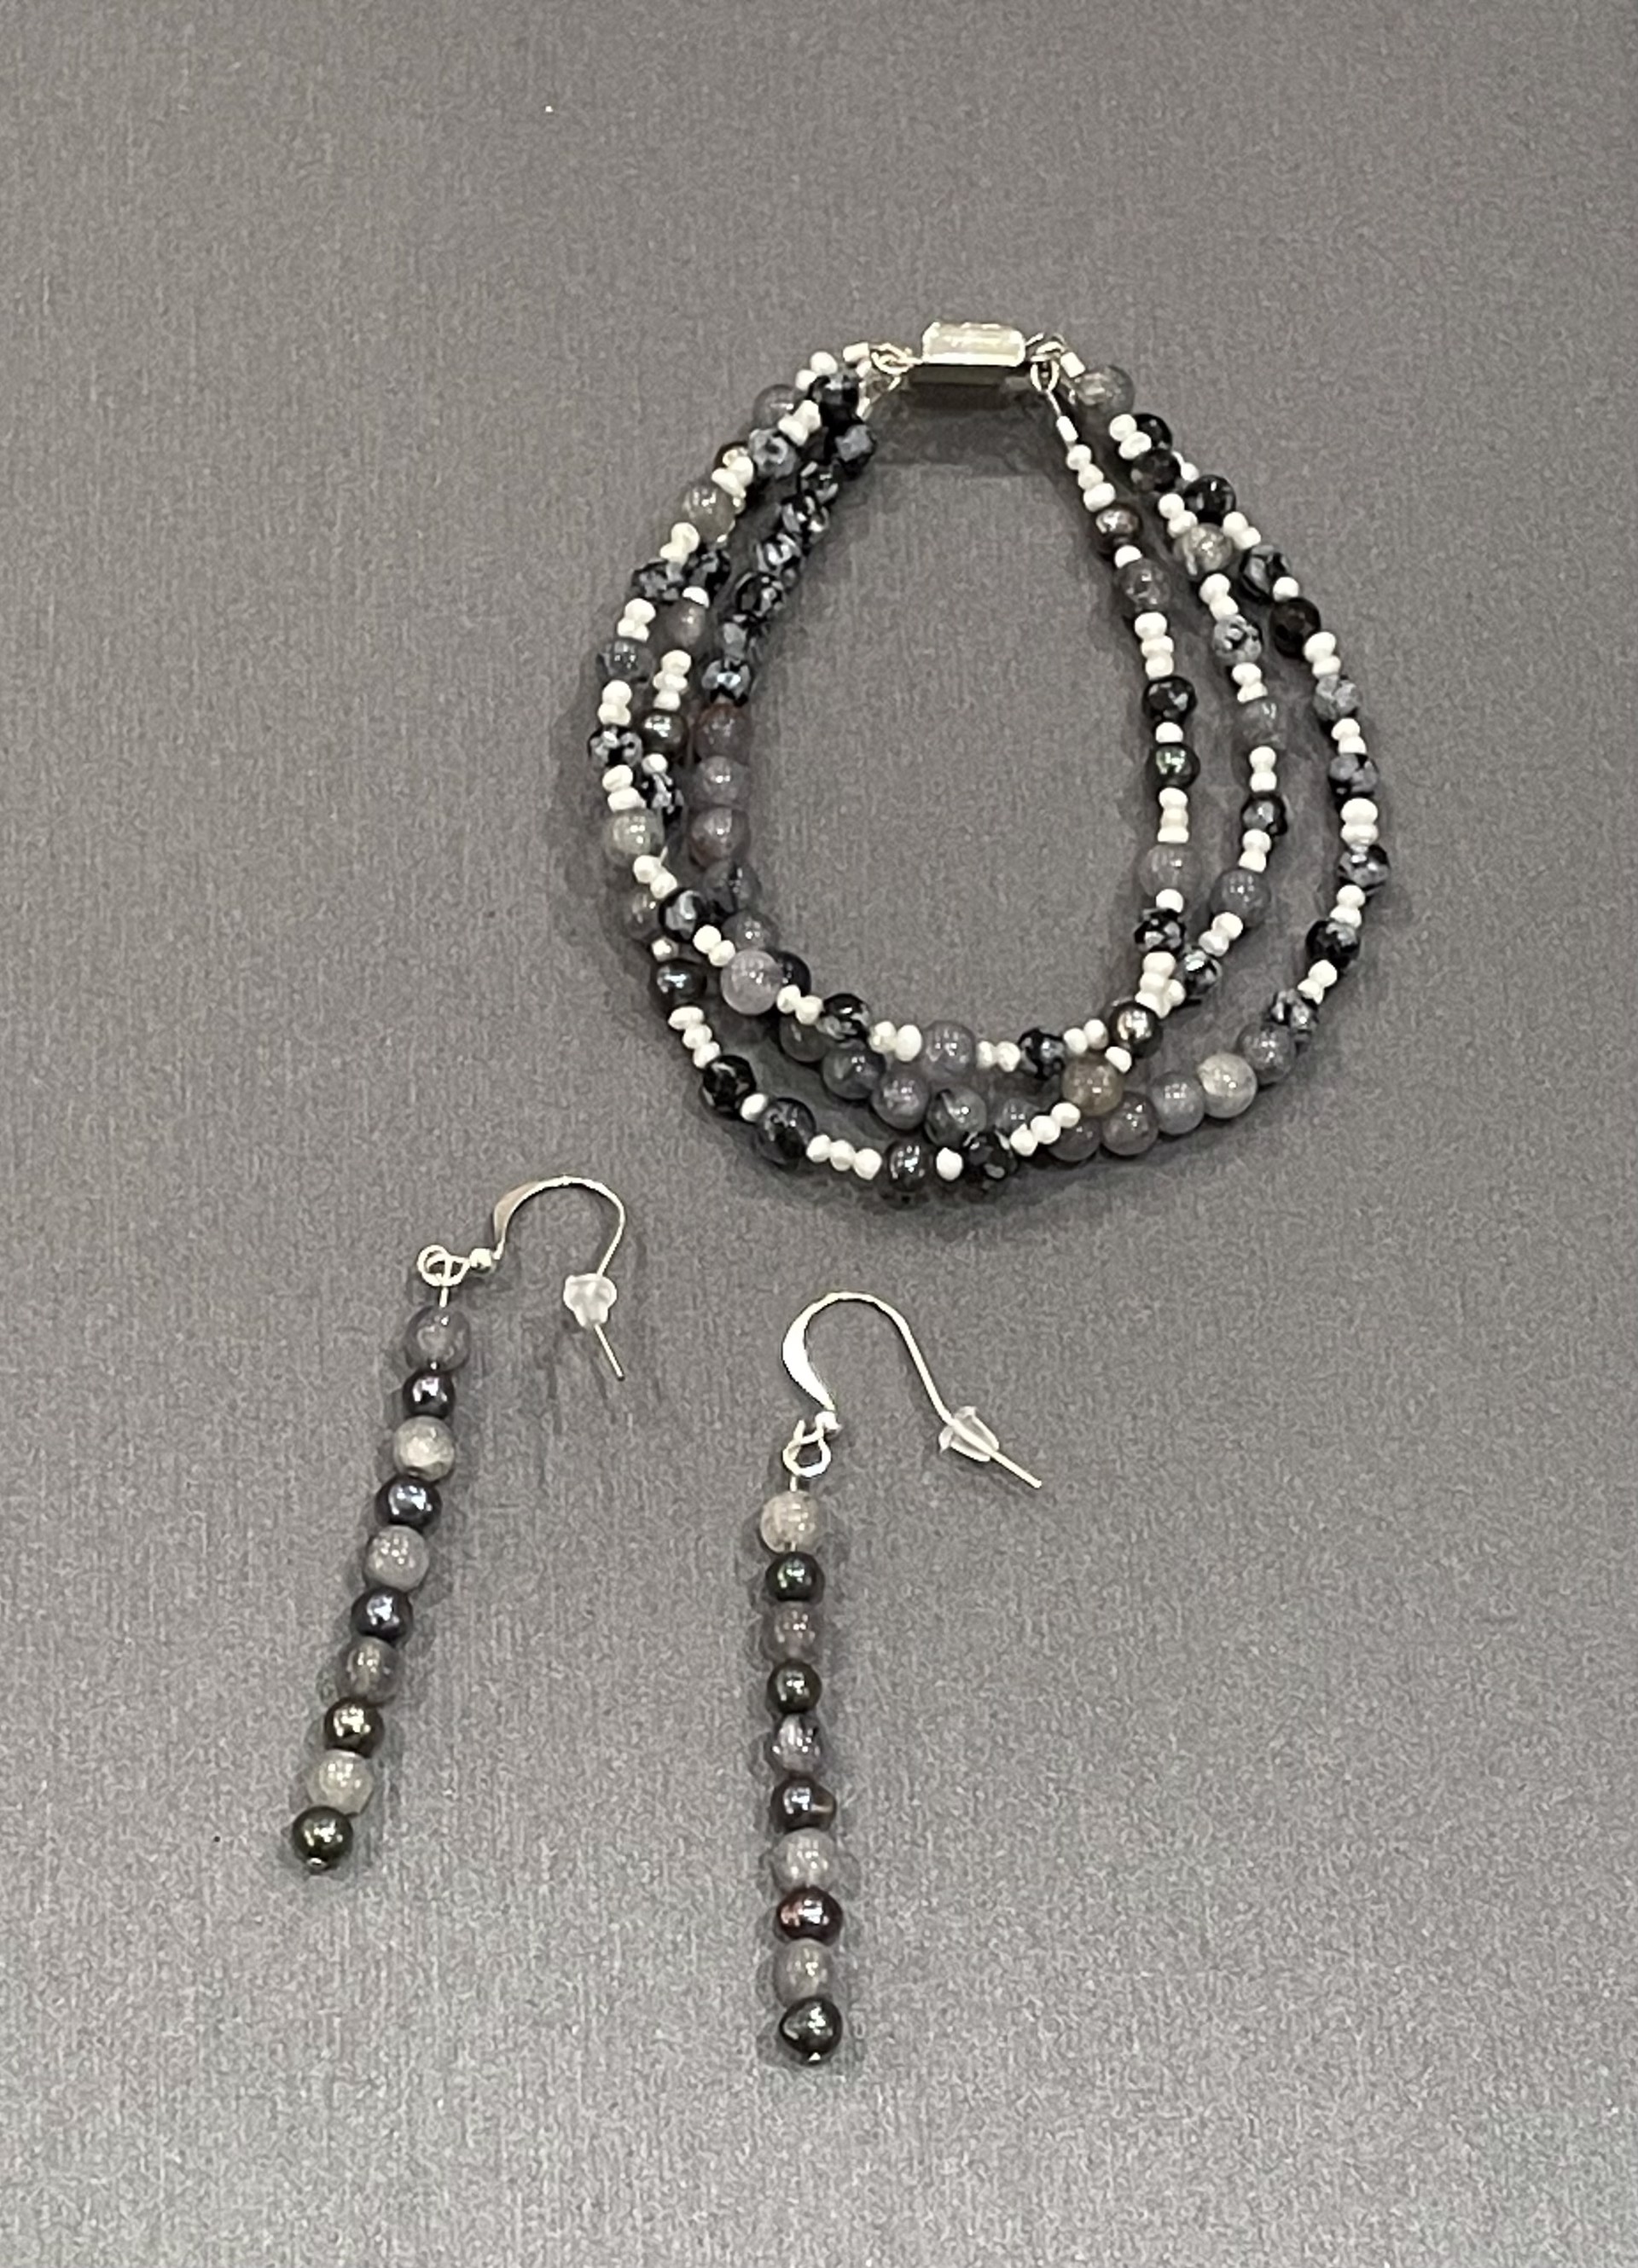 Stone and Pearl Earrings and Bracelet by Patrice Box